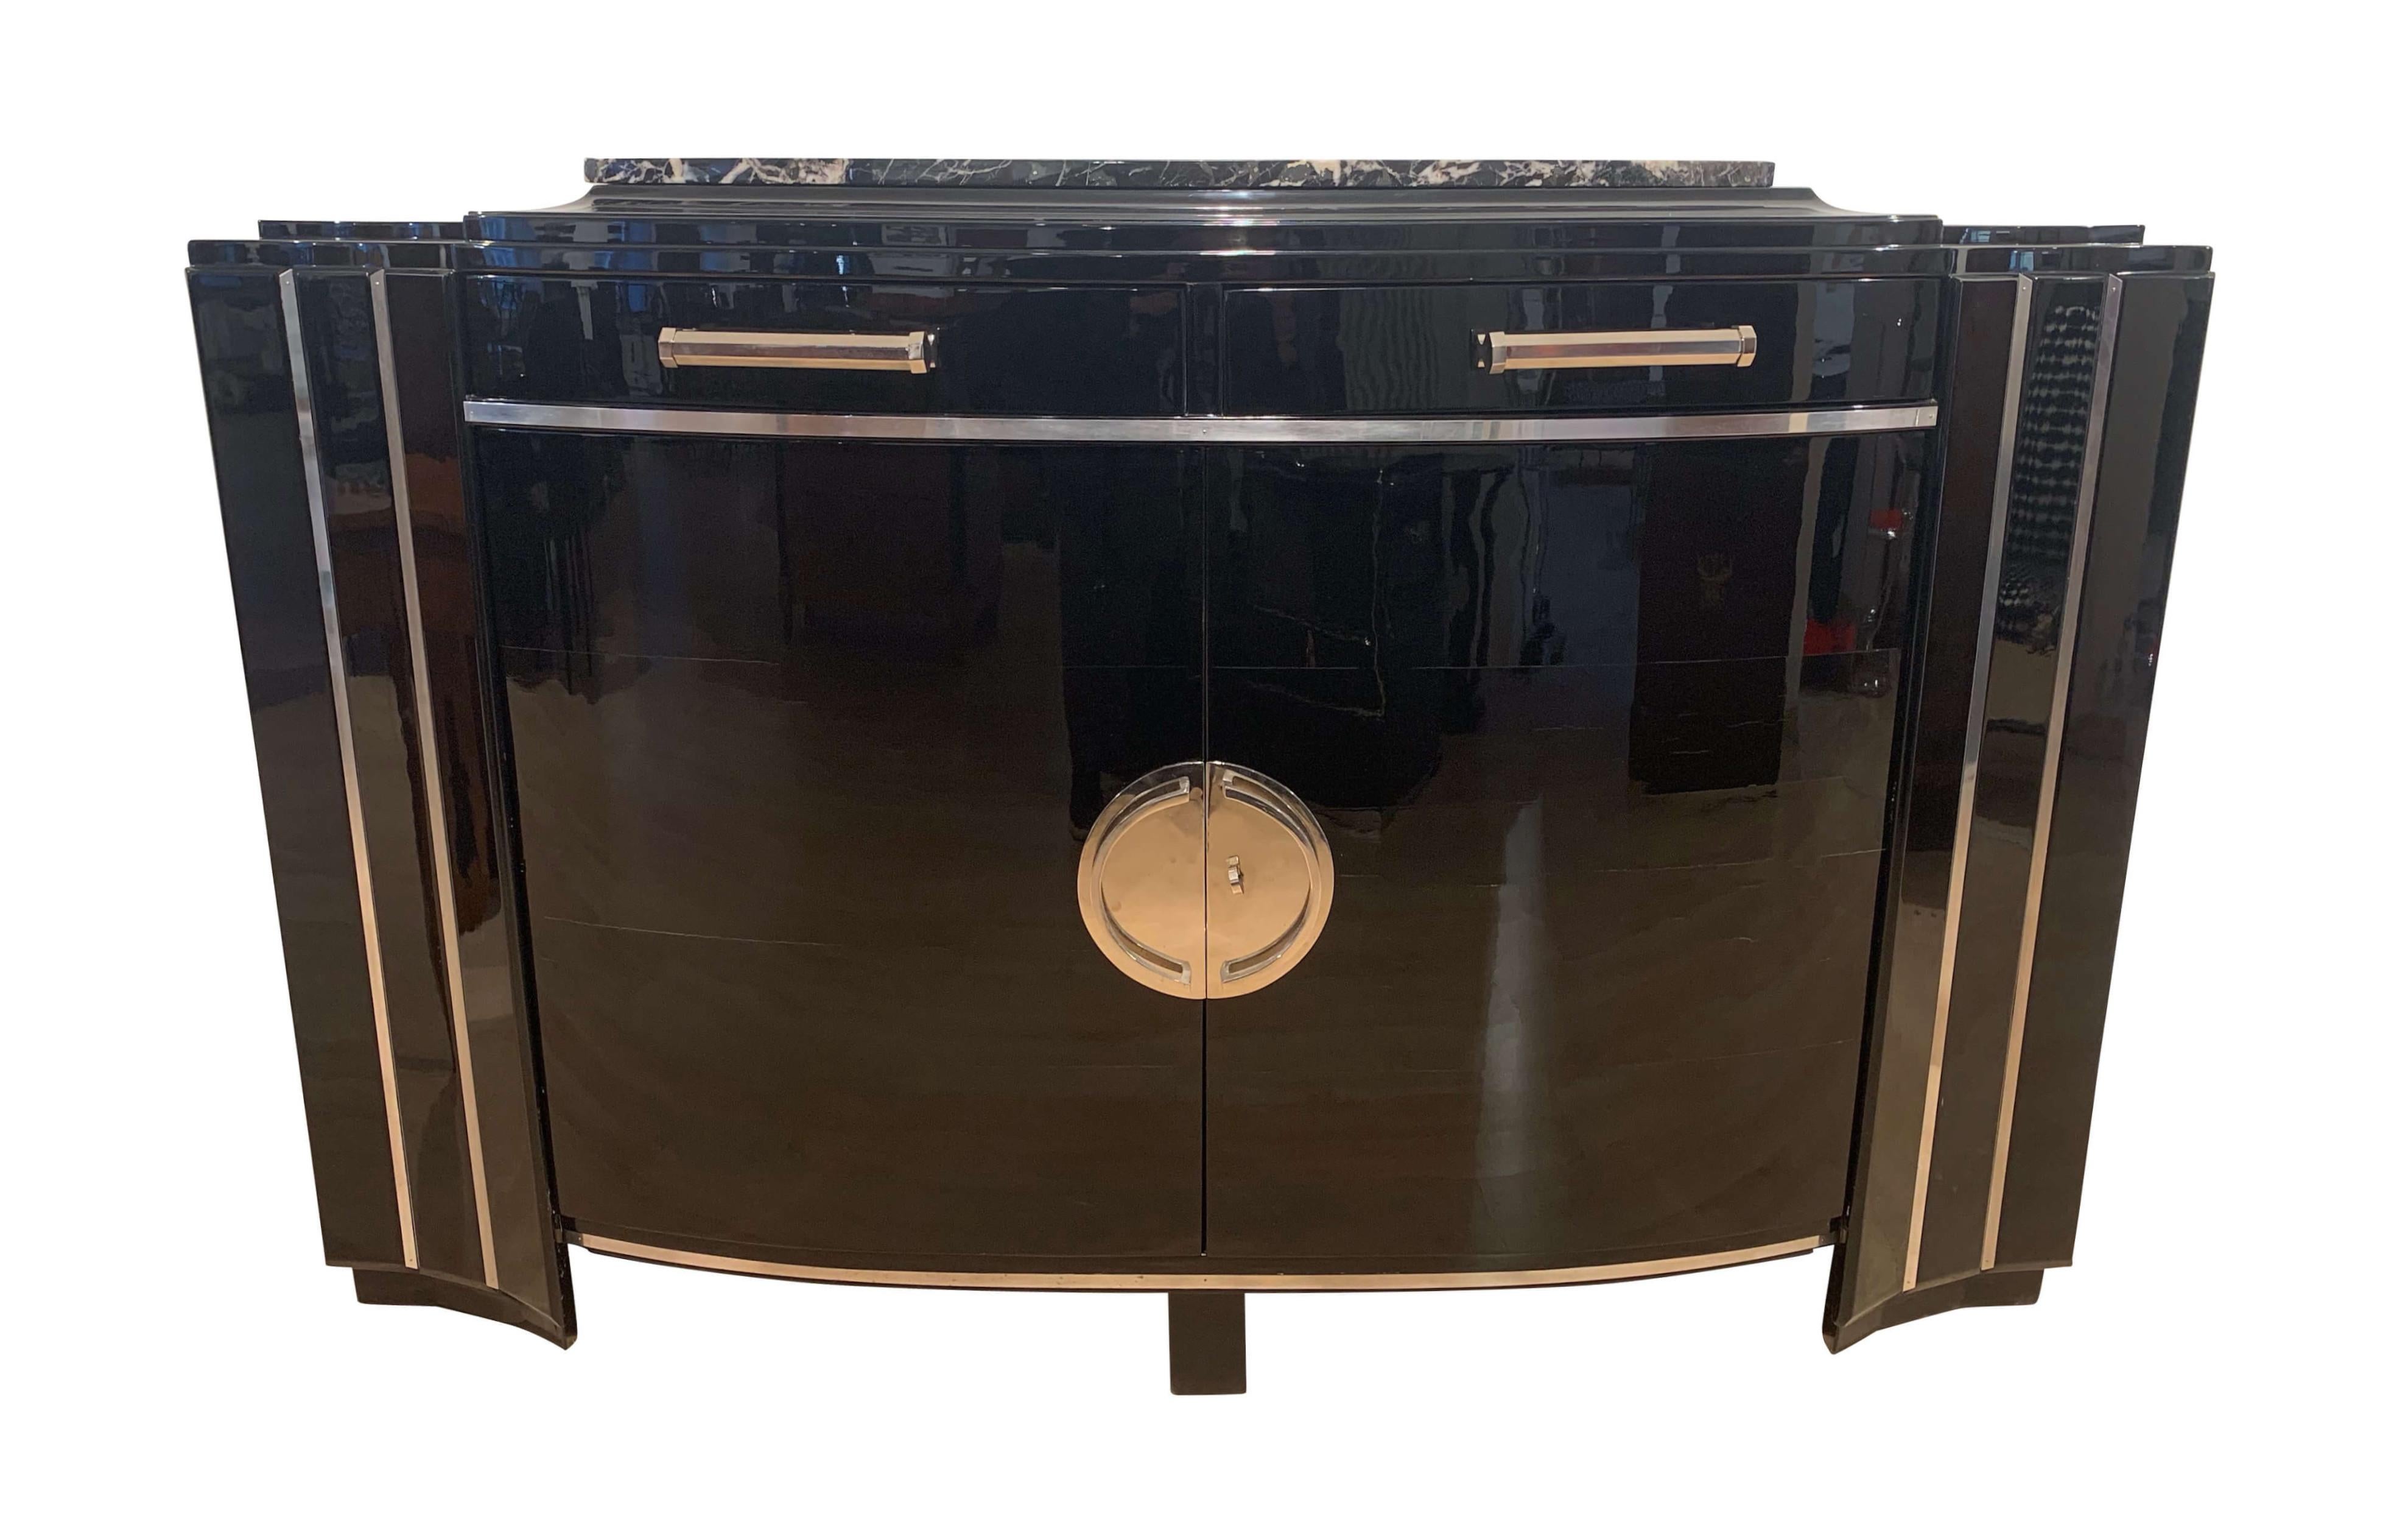 Elegant Art Deco sideboard with curved / convex doors, black lacquer, mahogany and chromed parts, from France, circa 1930.

Walnut solid wood corpus elaborately lacquered with black lacquer and high-gloss polished.
Originally is had a dark stained